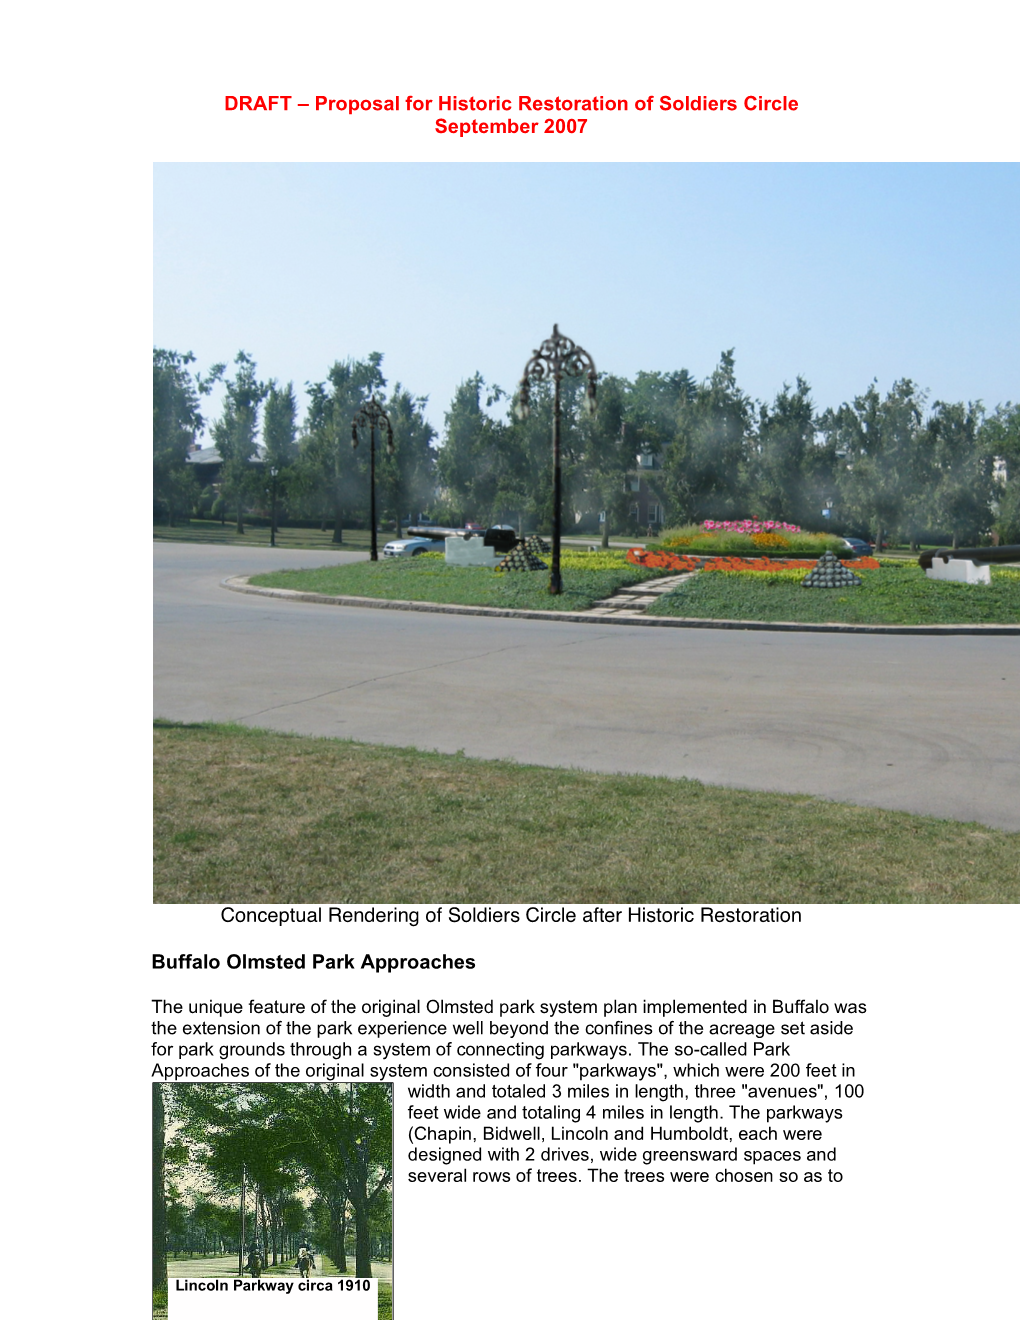 DRAFT – Proposal for Historic Restoration of Soldiers Circle September 2007